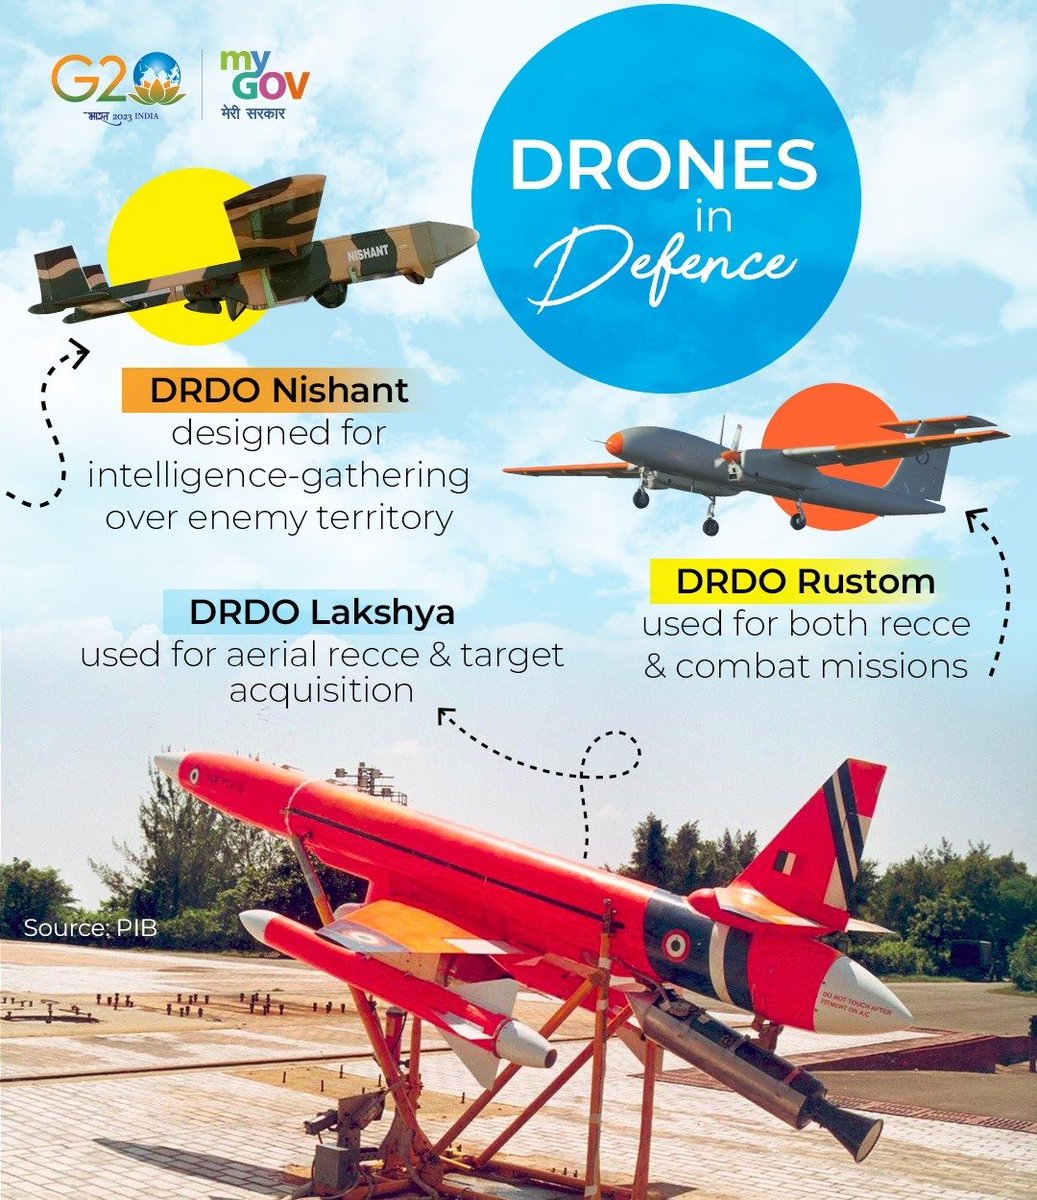 Making India future-ready with #Drones

#PLI scheme enables #NewIndia to revolutionize several sectors using #drones and is making #India a global drone hub

#DroneRevolution #NewIndia